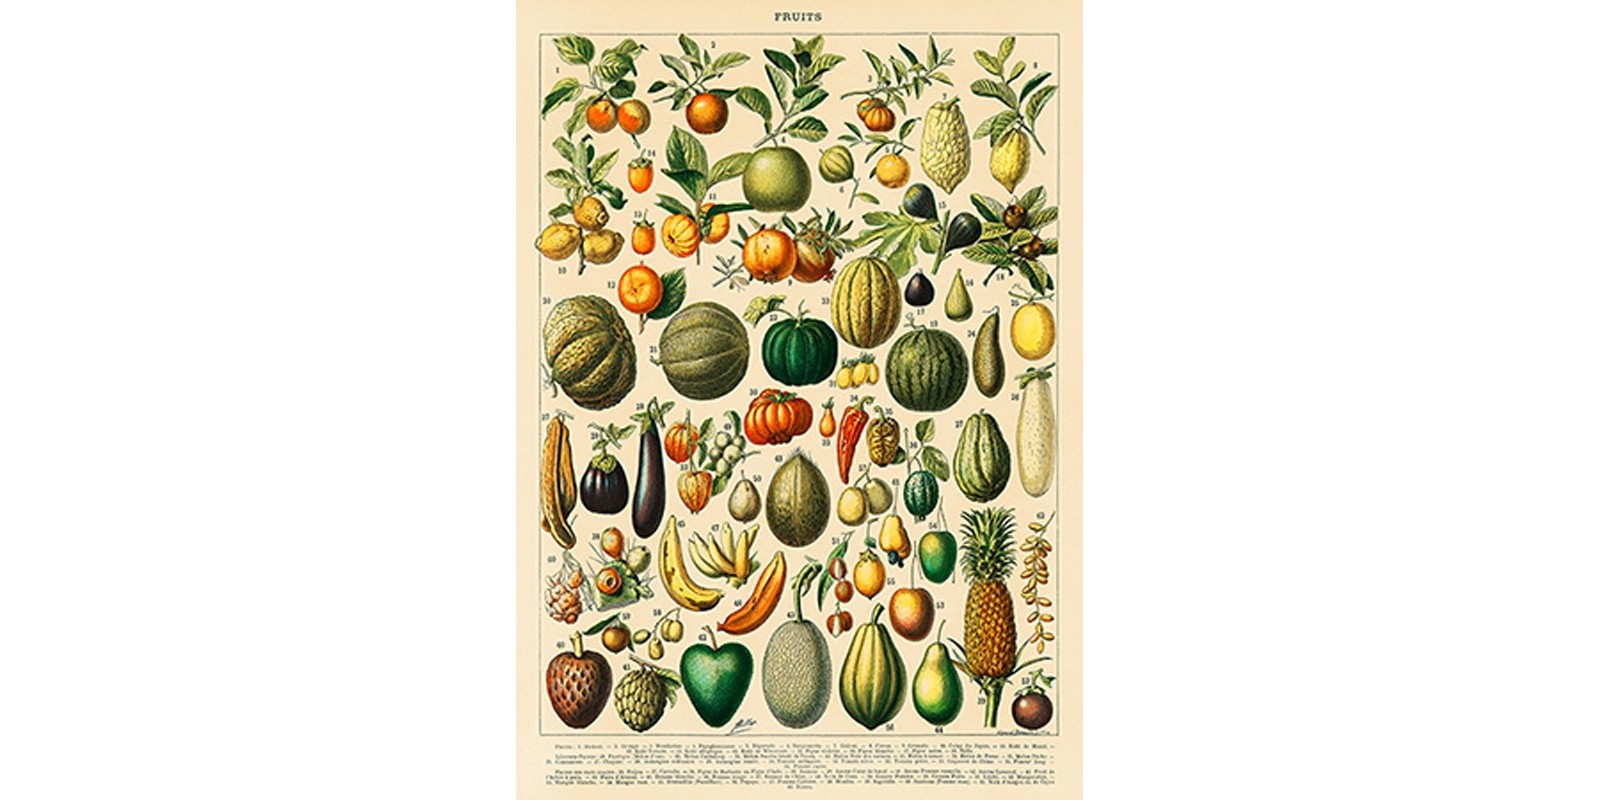 Adolphe Millot - Fruits and Vegetables